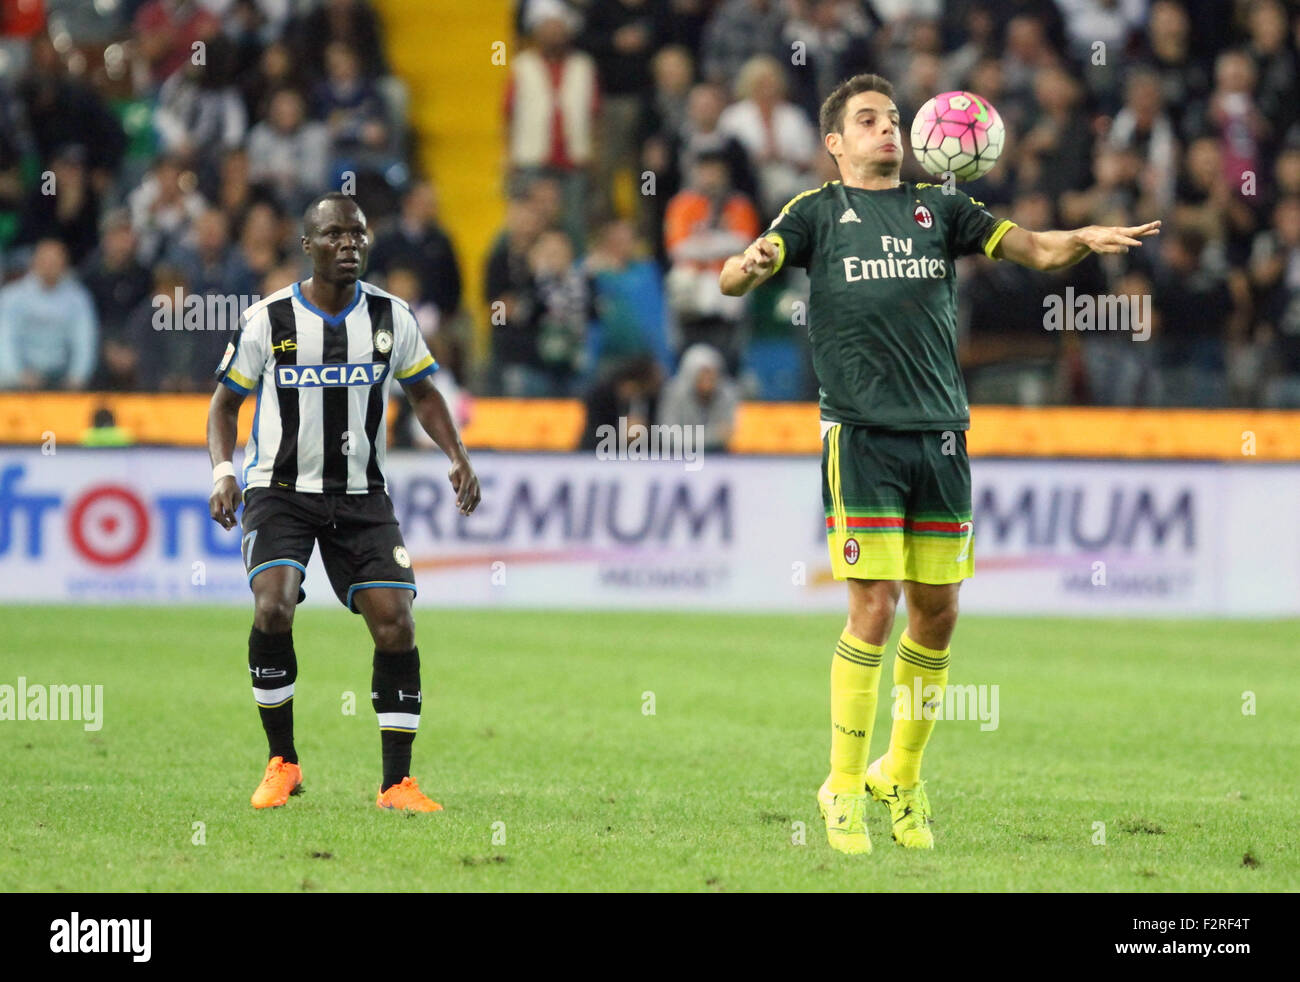 Udine, Italy. 22nd September, 2015. : Milan's midfielder Giacomo Bonaventura (R) and Udinese's midfielder Emmanuel Agyemang Badu during the Italian Serie A football match between Udinese Calcio v AC Milan at Friuli Stadium on 22 Semptember, 2015 in Udine. Credit:  Andrea Spinelli/Alamy Live News Stock Photo